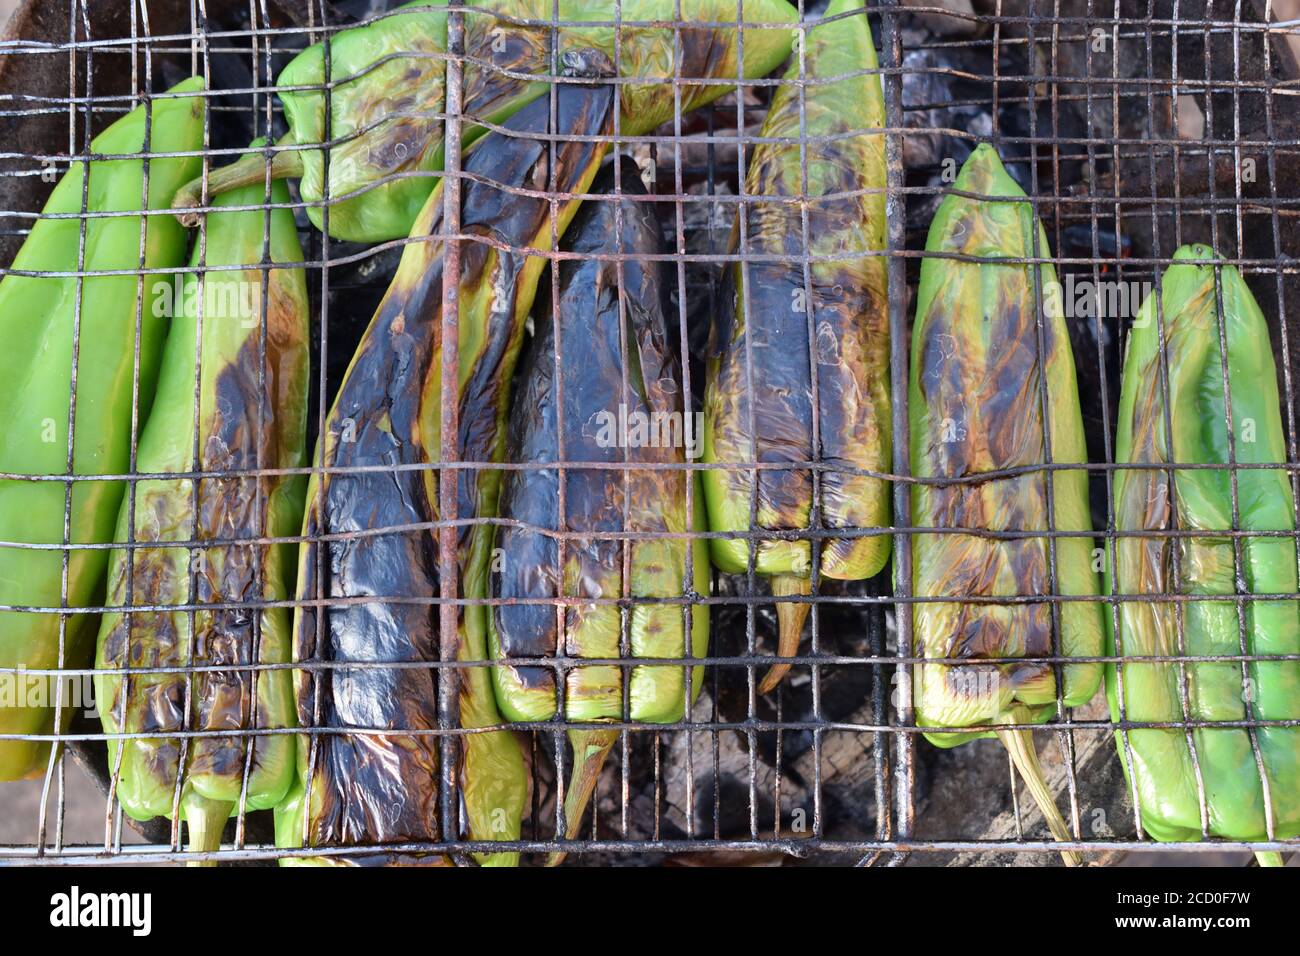 green peppers grilling on the barbecue for healthy lifestyle eating Stock Photo